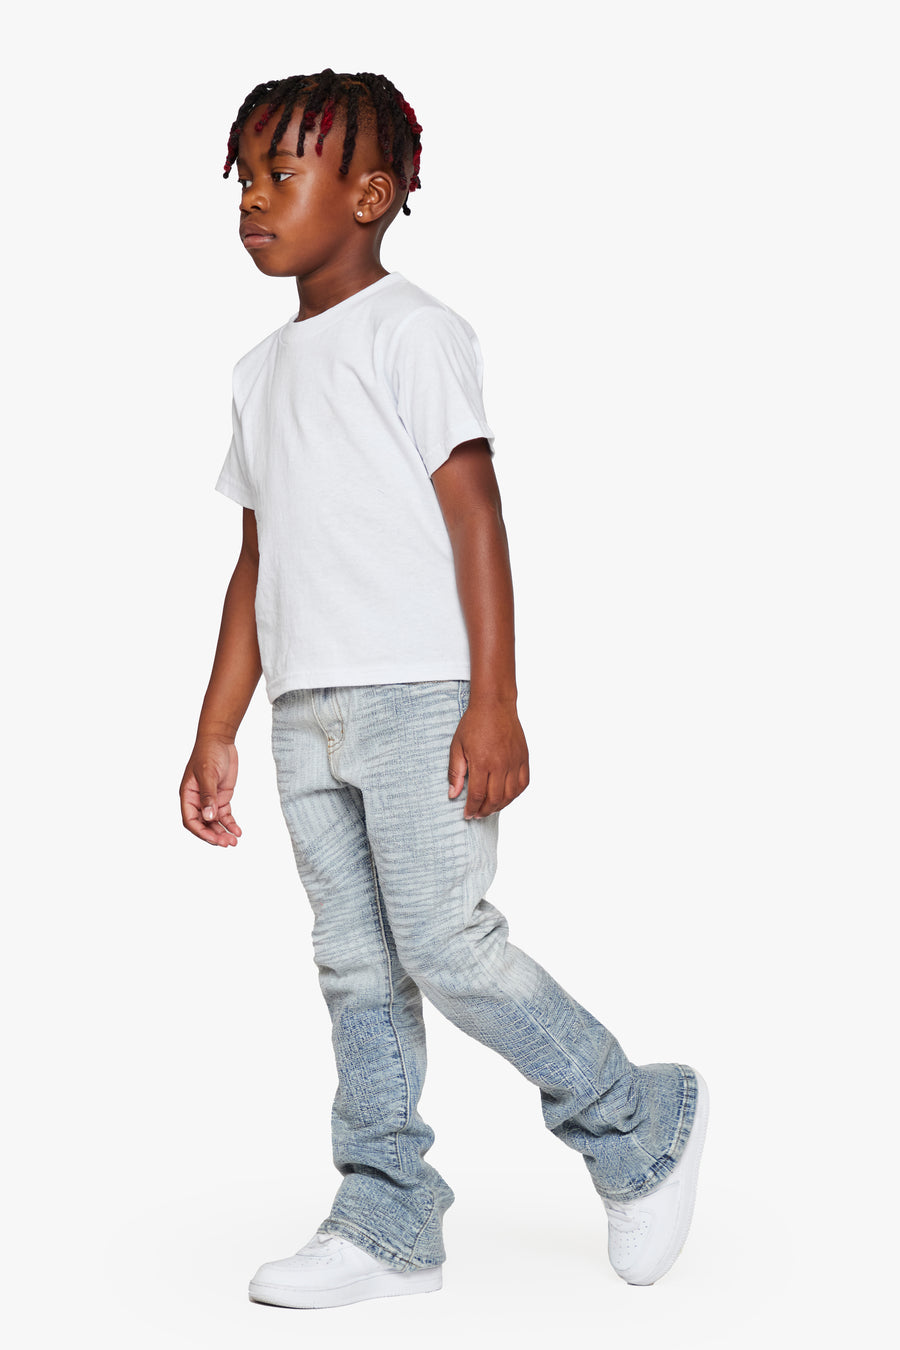 "MR. EMBROIDERY” ICY AZURE KIDS STACKED FLARE